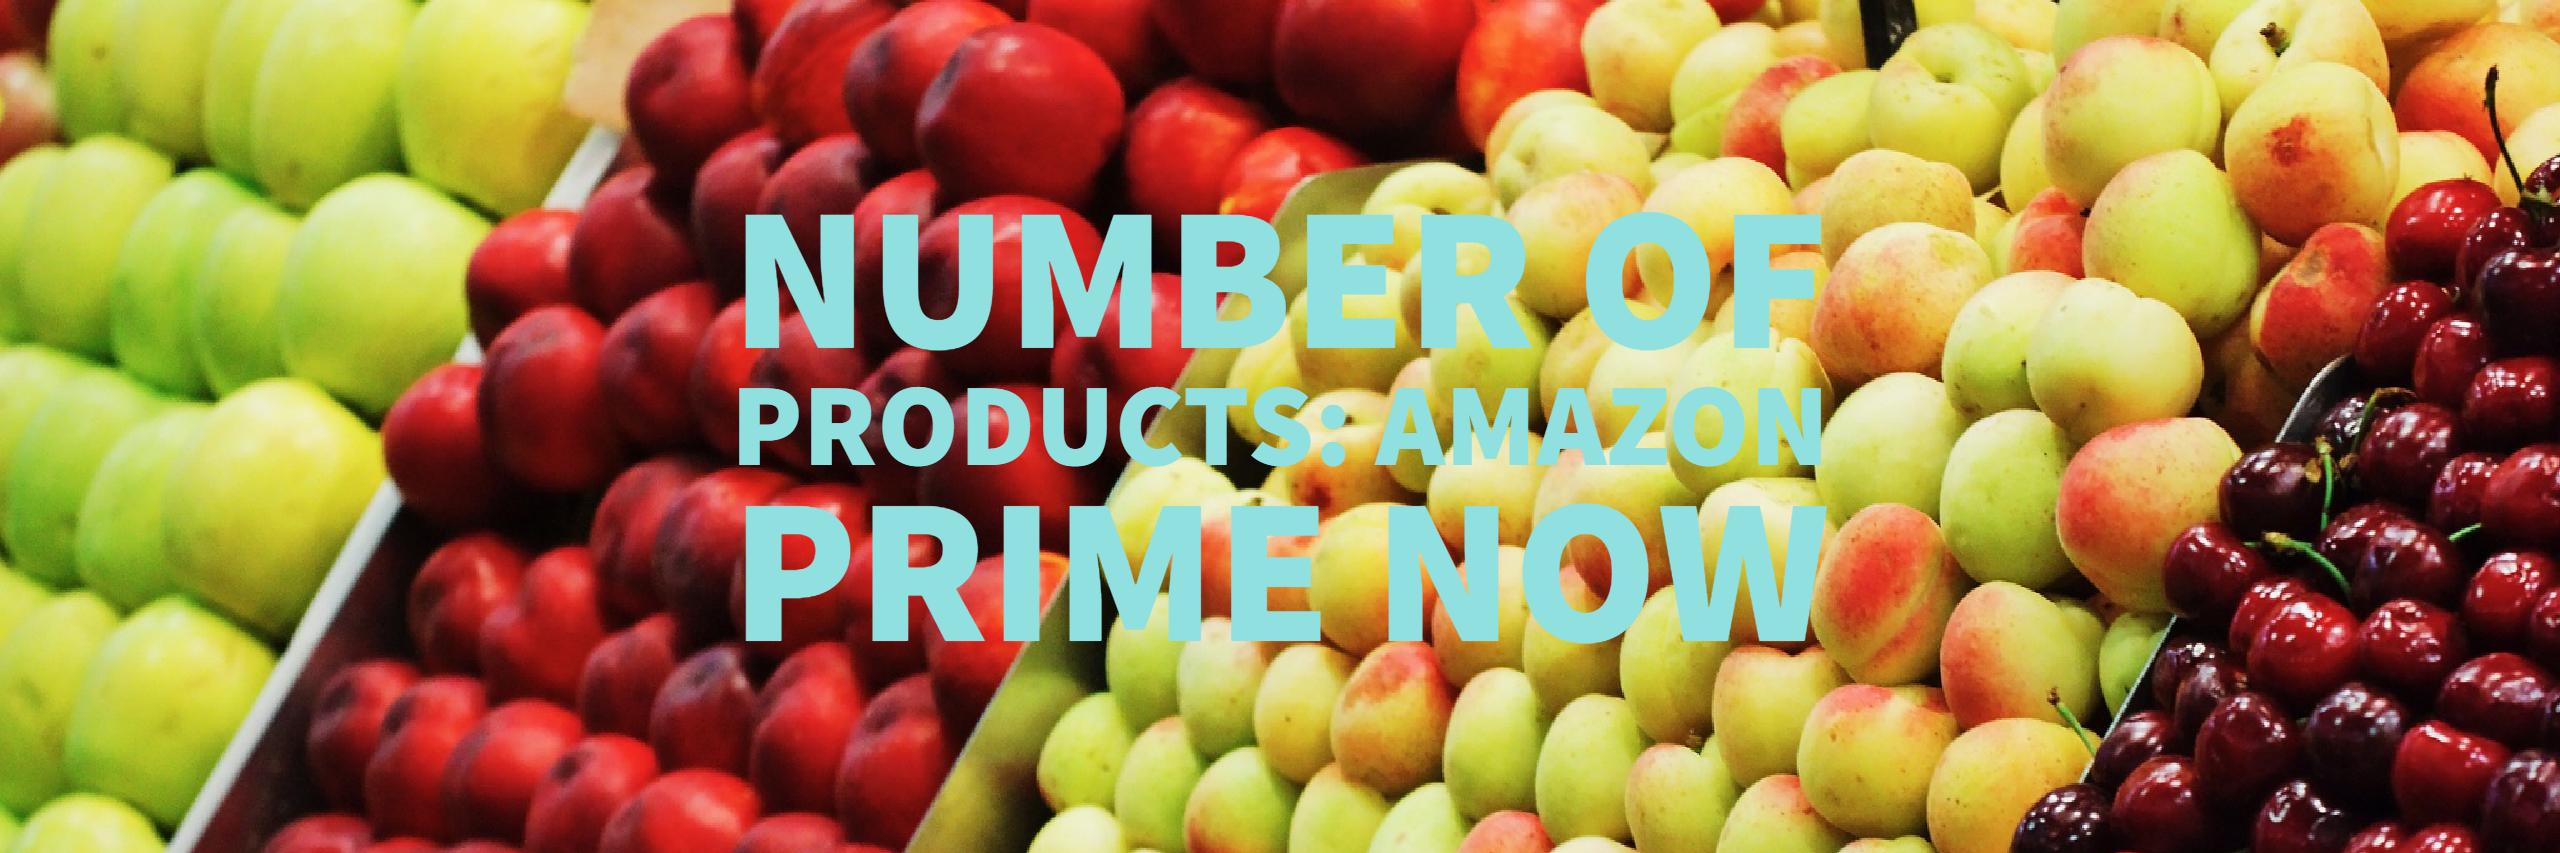 Number of Products on Sale at Amazon Prime Now